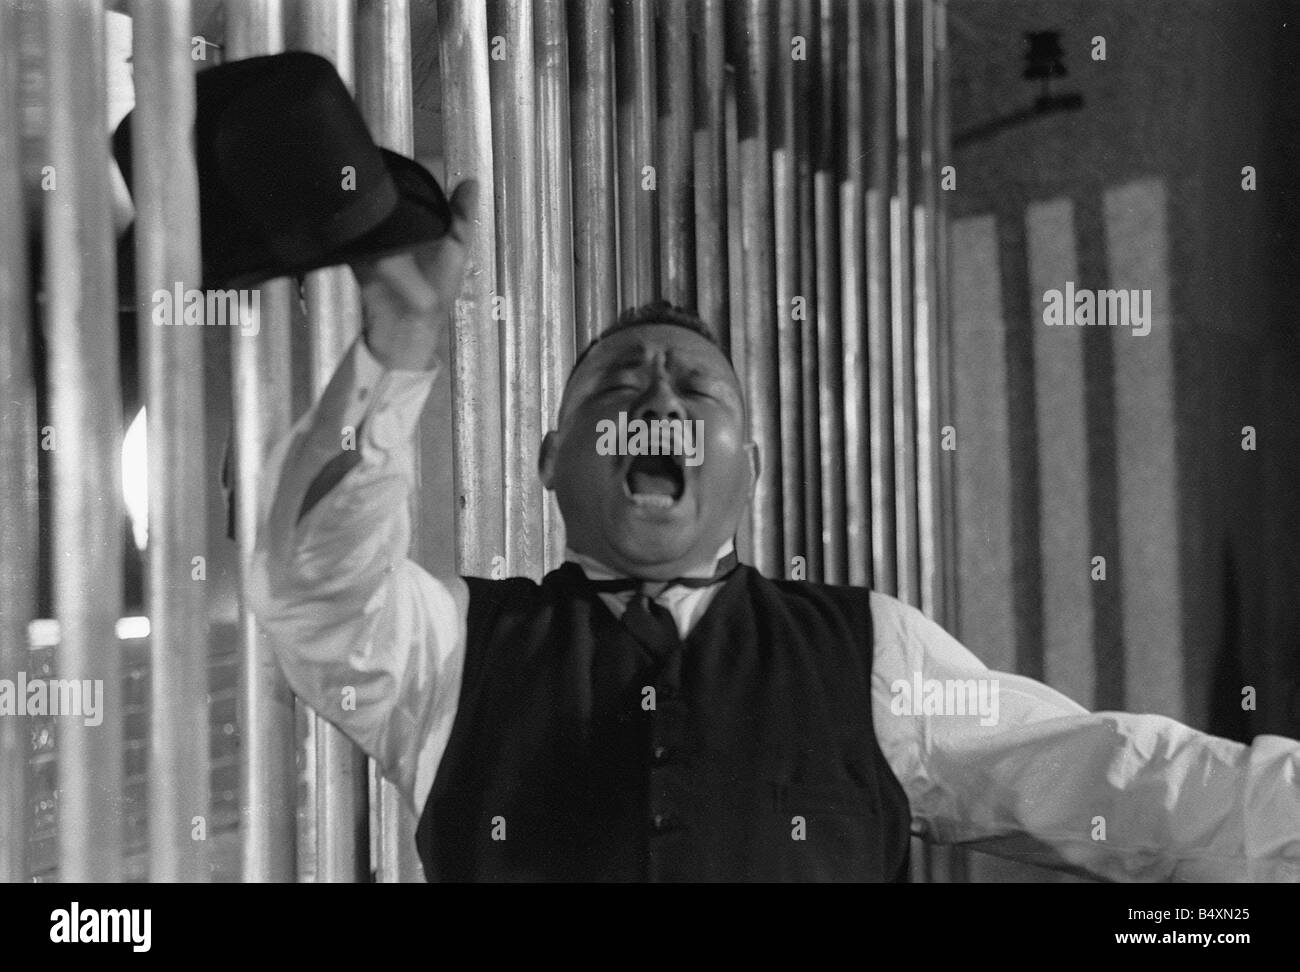 Film Goldfinger 1964 Sean Connery as James Bond 007 electrocutes Goldfinger s henchman Odd Job in the vault at Fort Knox Stock Photo